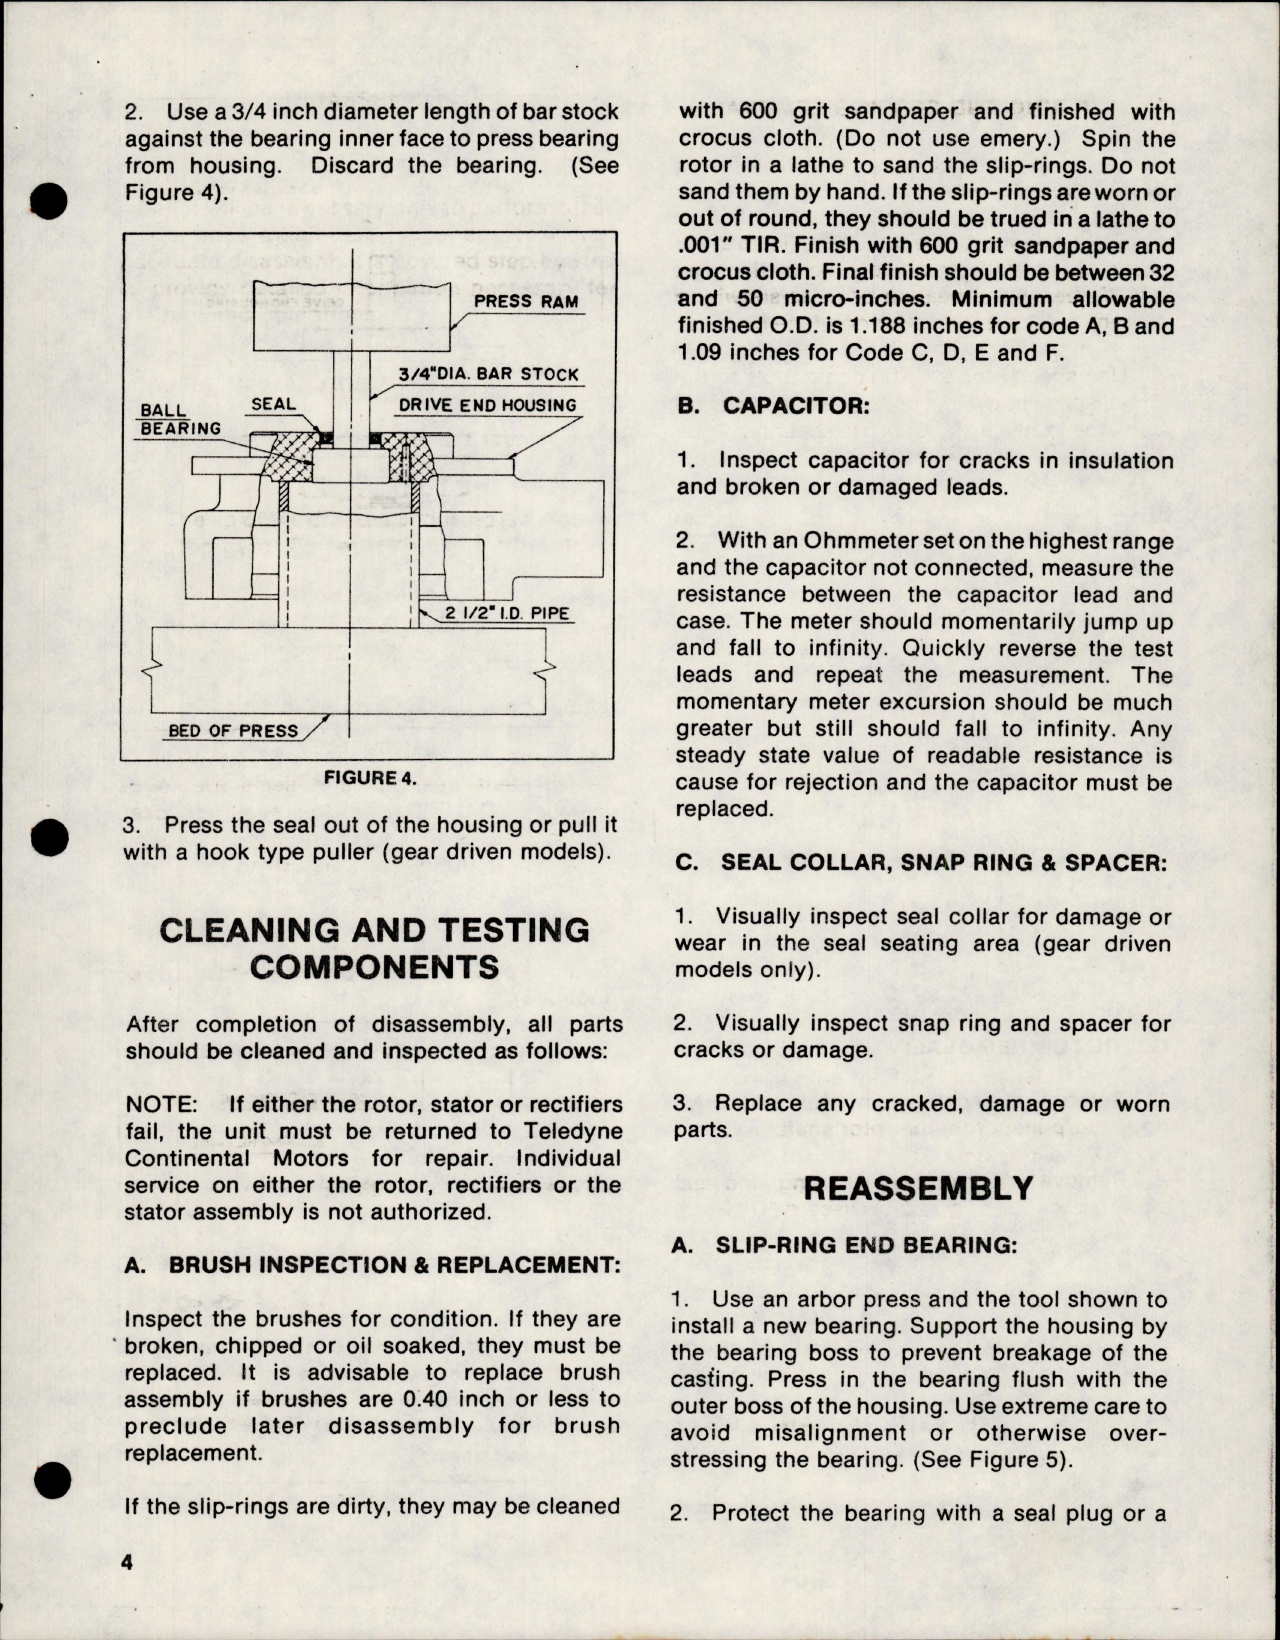 Sample page 7 from AirCorps Library document: Service Instructions for Aircraft Alternator